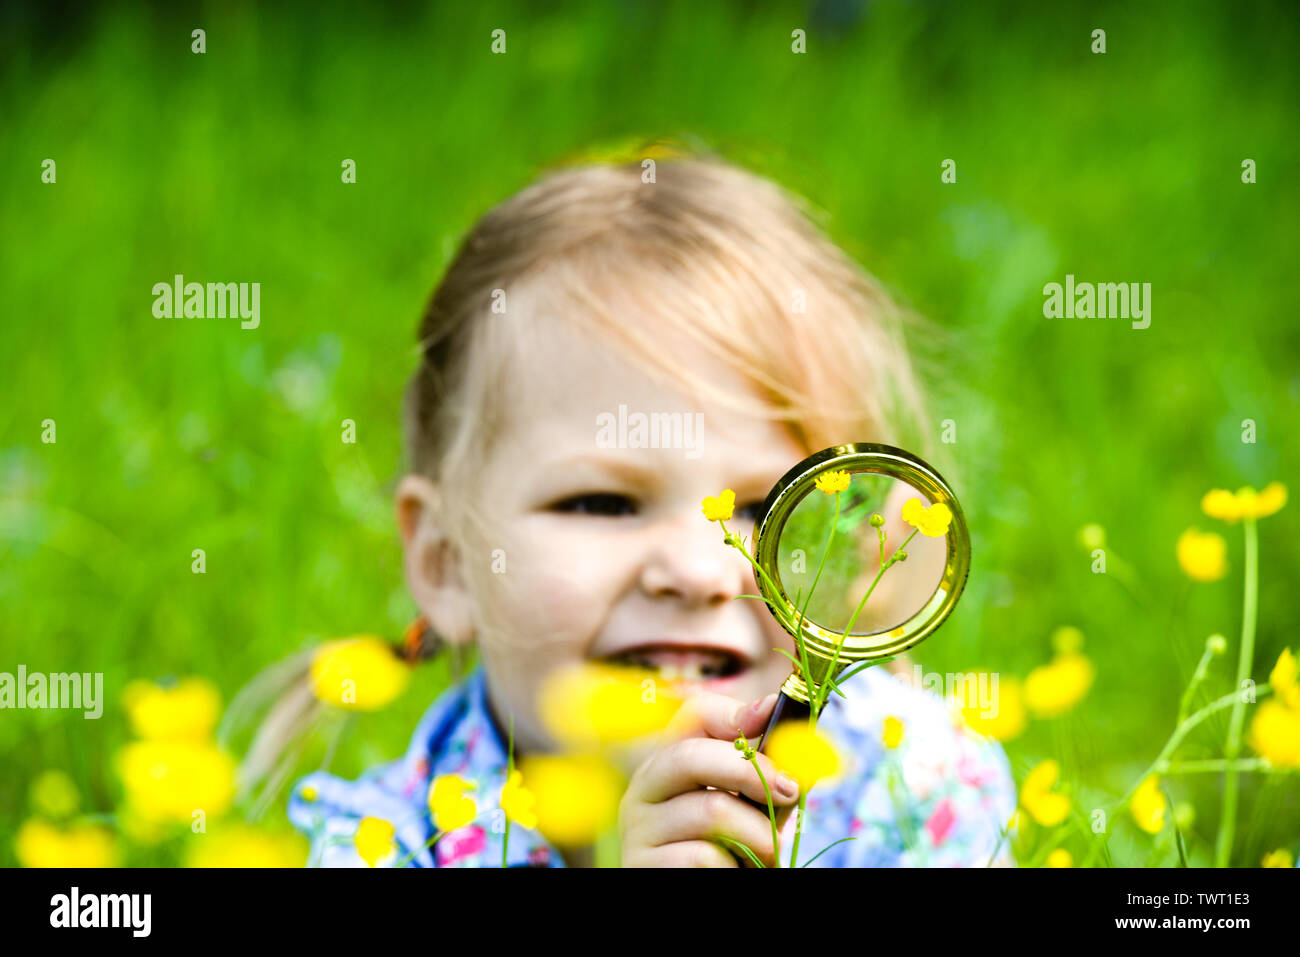 The child explores the grass in the meadow through a magnifying glass. Little girl exploring the flower through the magnifying glass outdoors. Stock Photo